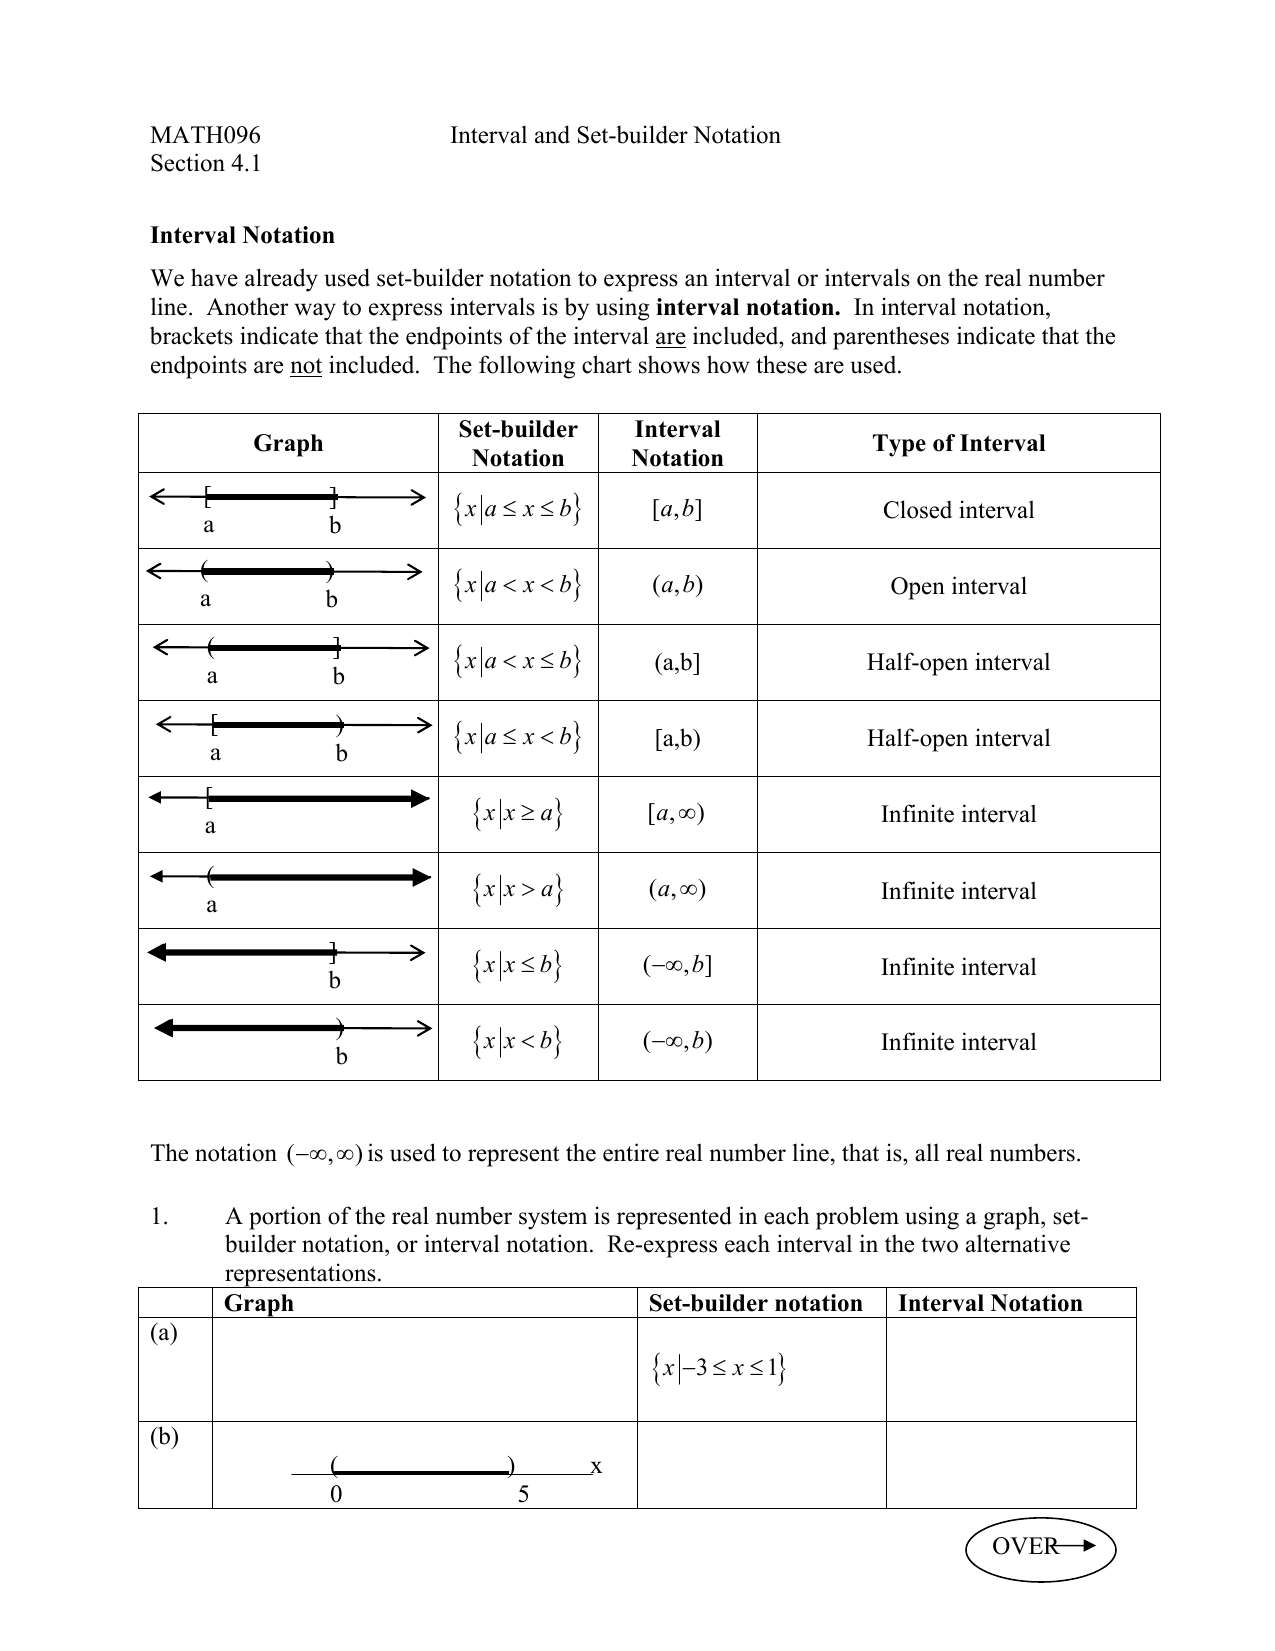 Worksheet for Interval Notation Section 20.20 In Interval Notation Worksheet With Answers